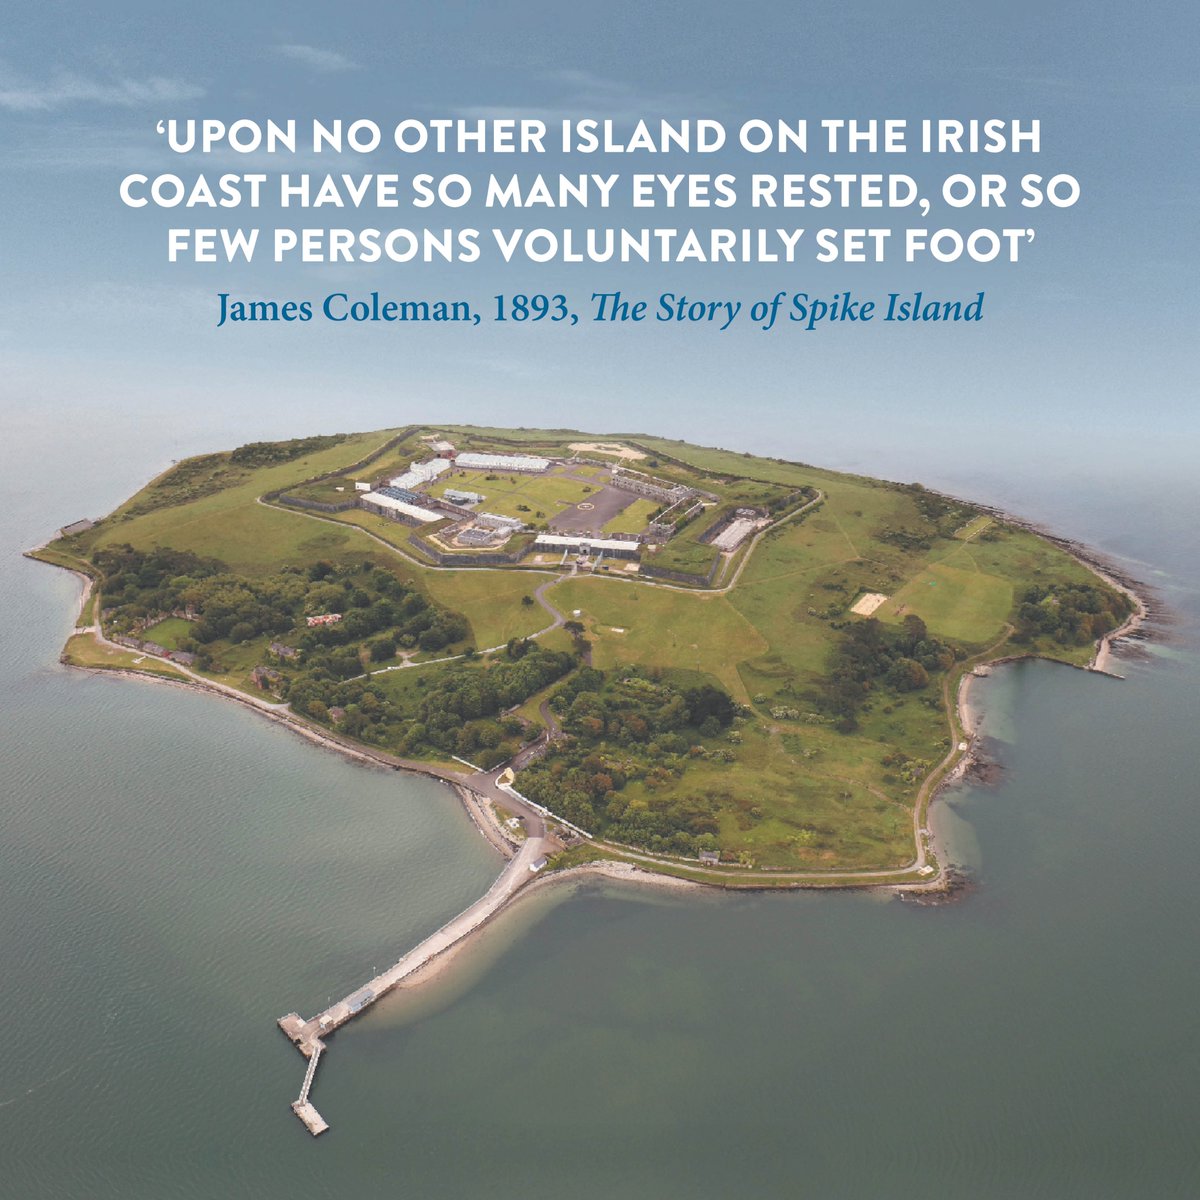 The first book to share the full and varied 1300 year history of Spike Island, one of our most extraordinary historical sites. John Crotty’s illustrated book is rich with stories from the characters who visited, made the island their home or were sentenced to its shores.